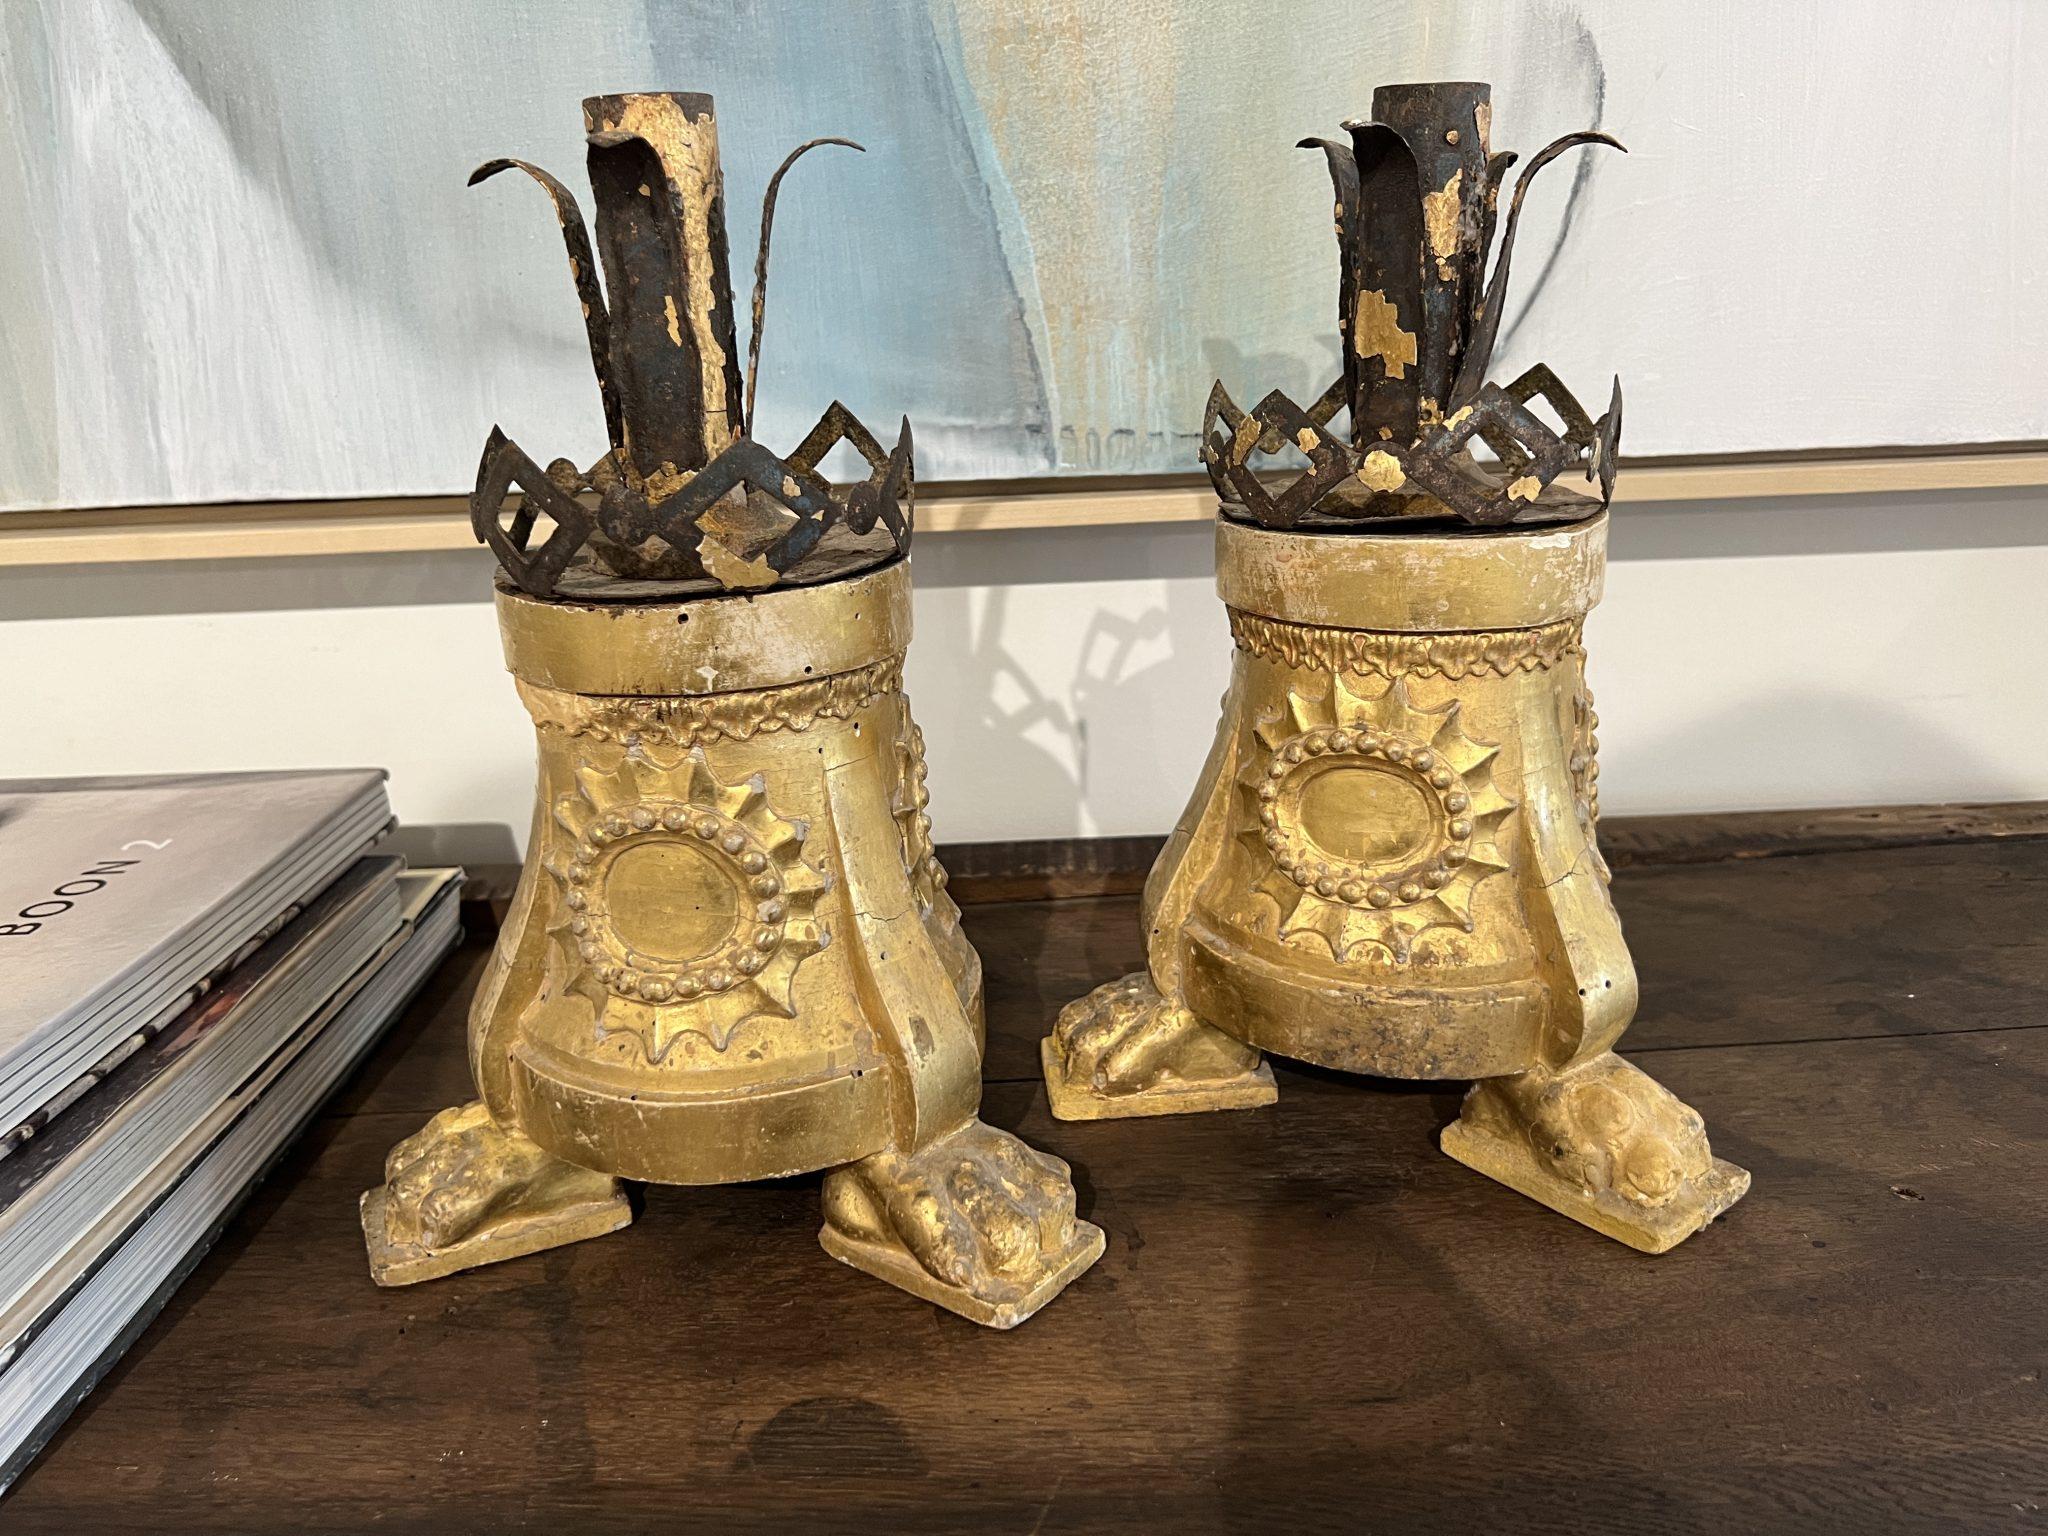 Pair of 18c Wood/Tole Candlesticks In Fair Condition For Sale In New Orleans, LA